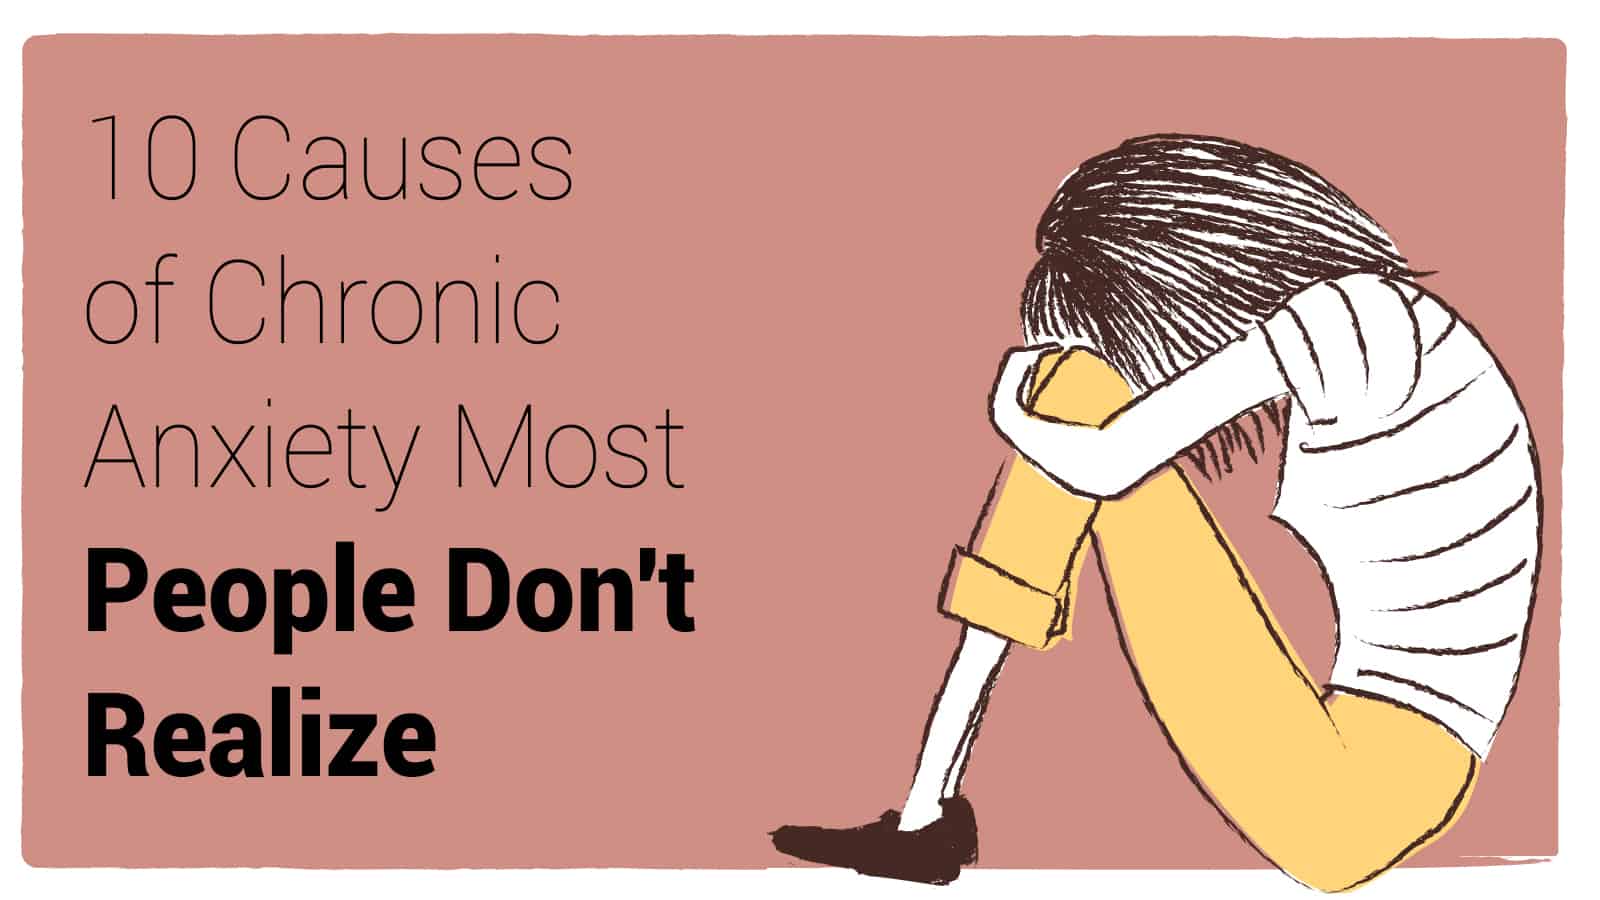 10 Causes of Chronic Anxiety Most People Don’t Realize